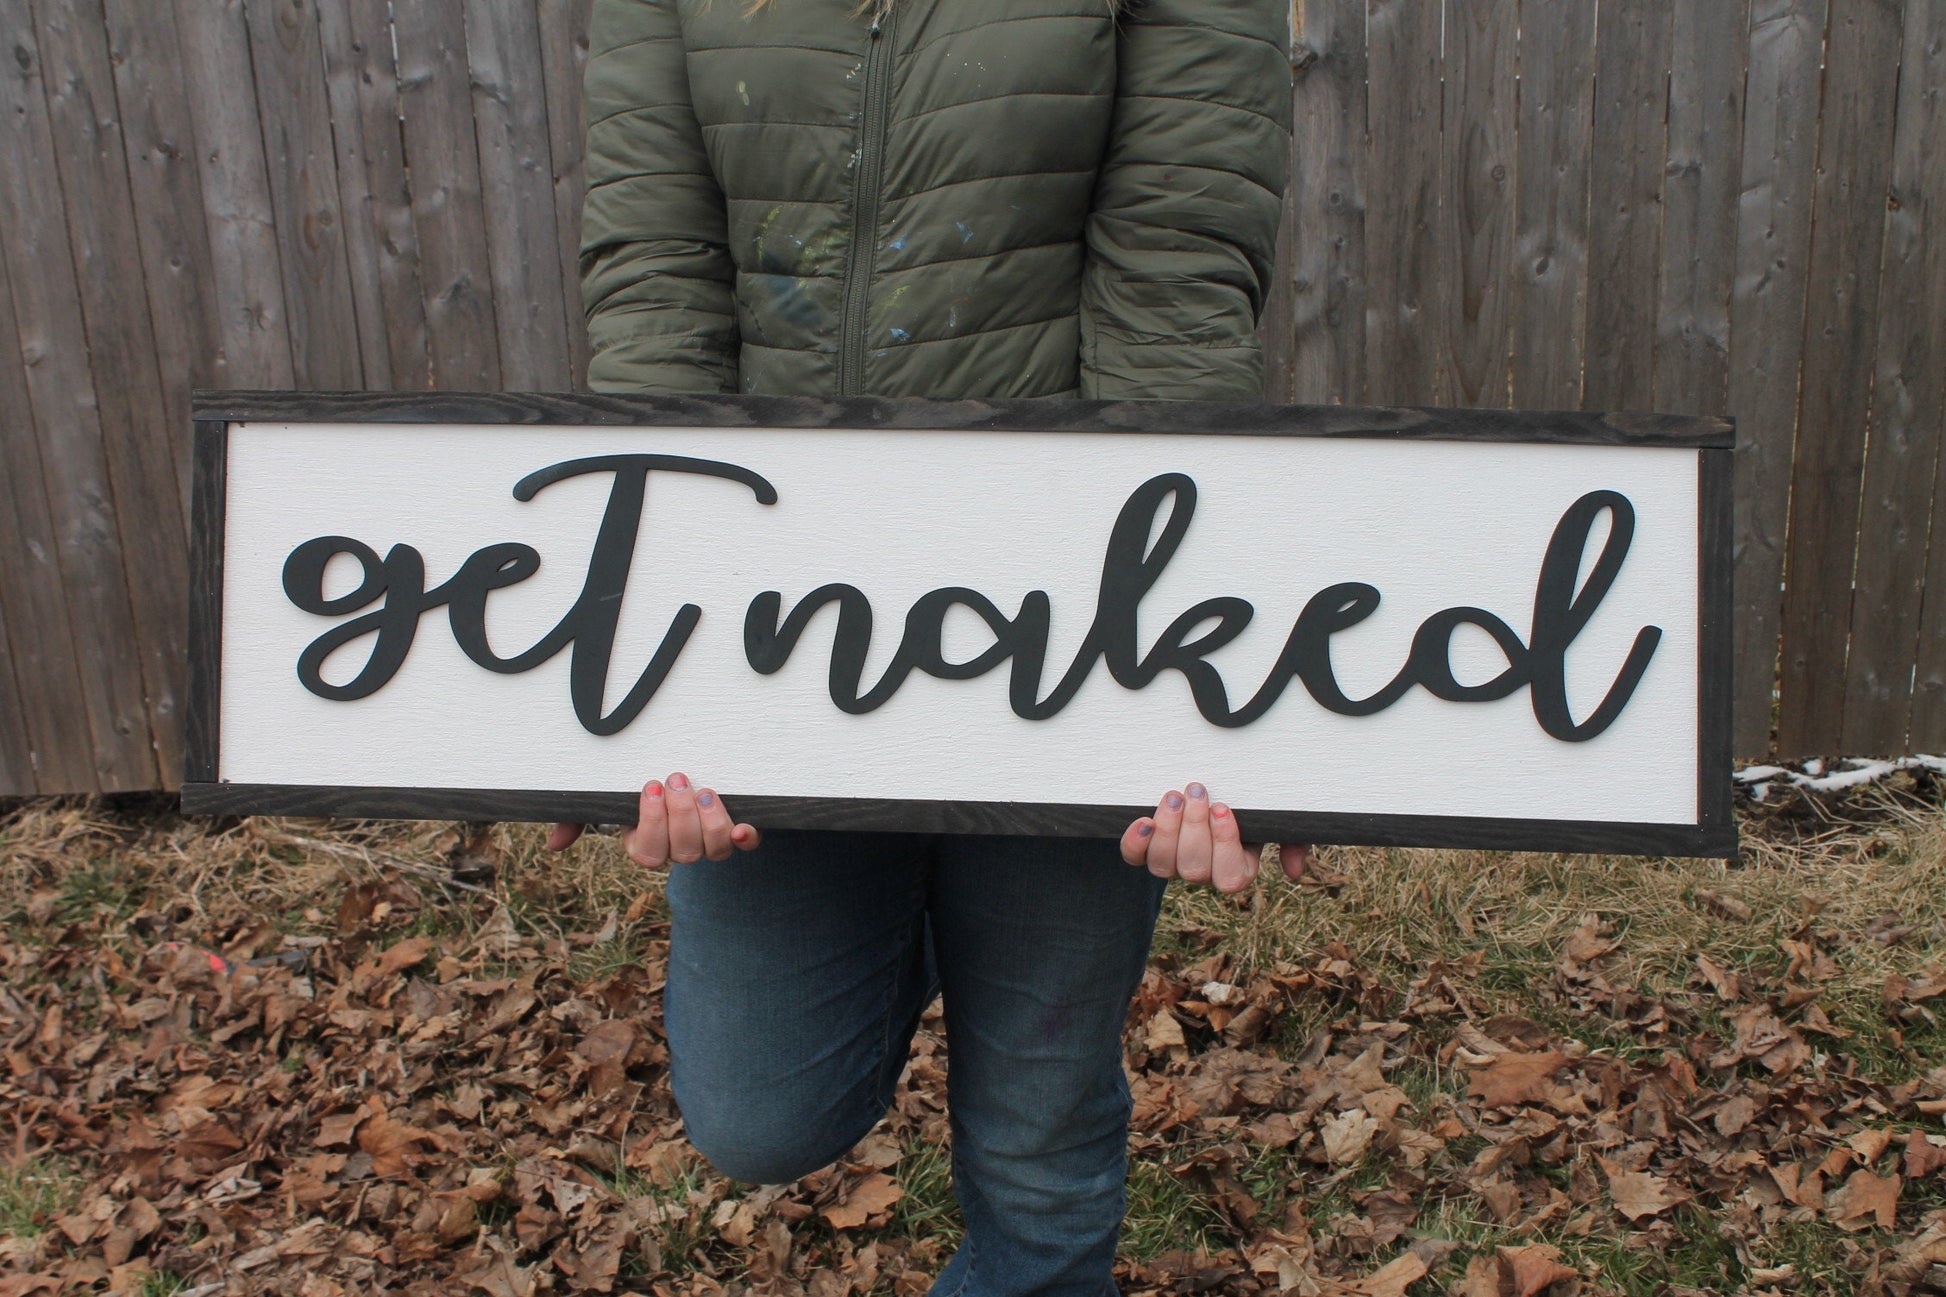 Get Naked Wood Sign, Bathroom Sign, Shower Decor, Bath, Raised Text, Decor, Large, Over Sized, Rustic, Primitive, Shabby Chic, 3D